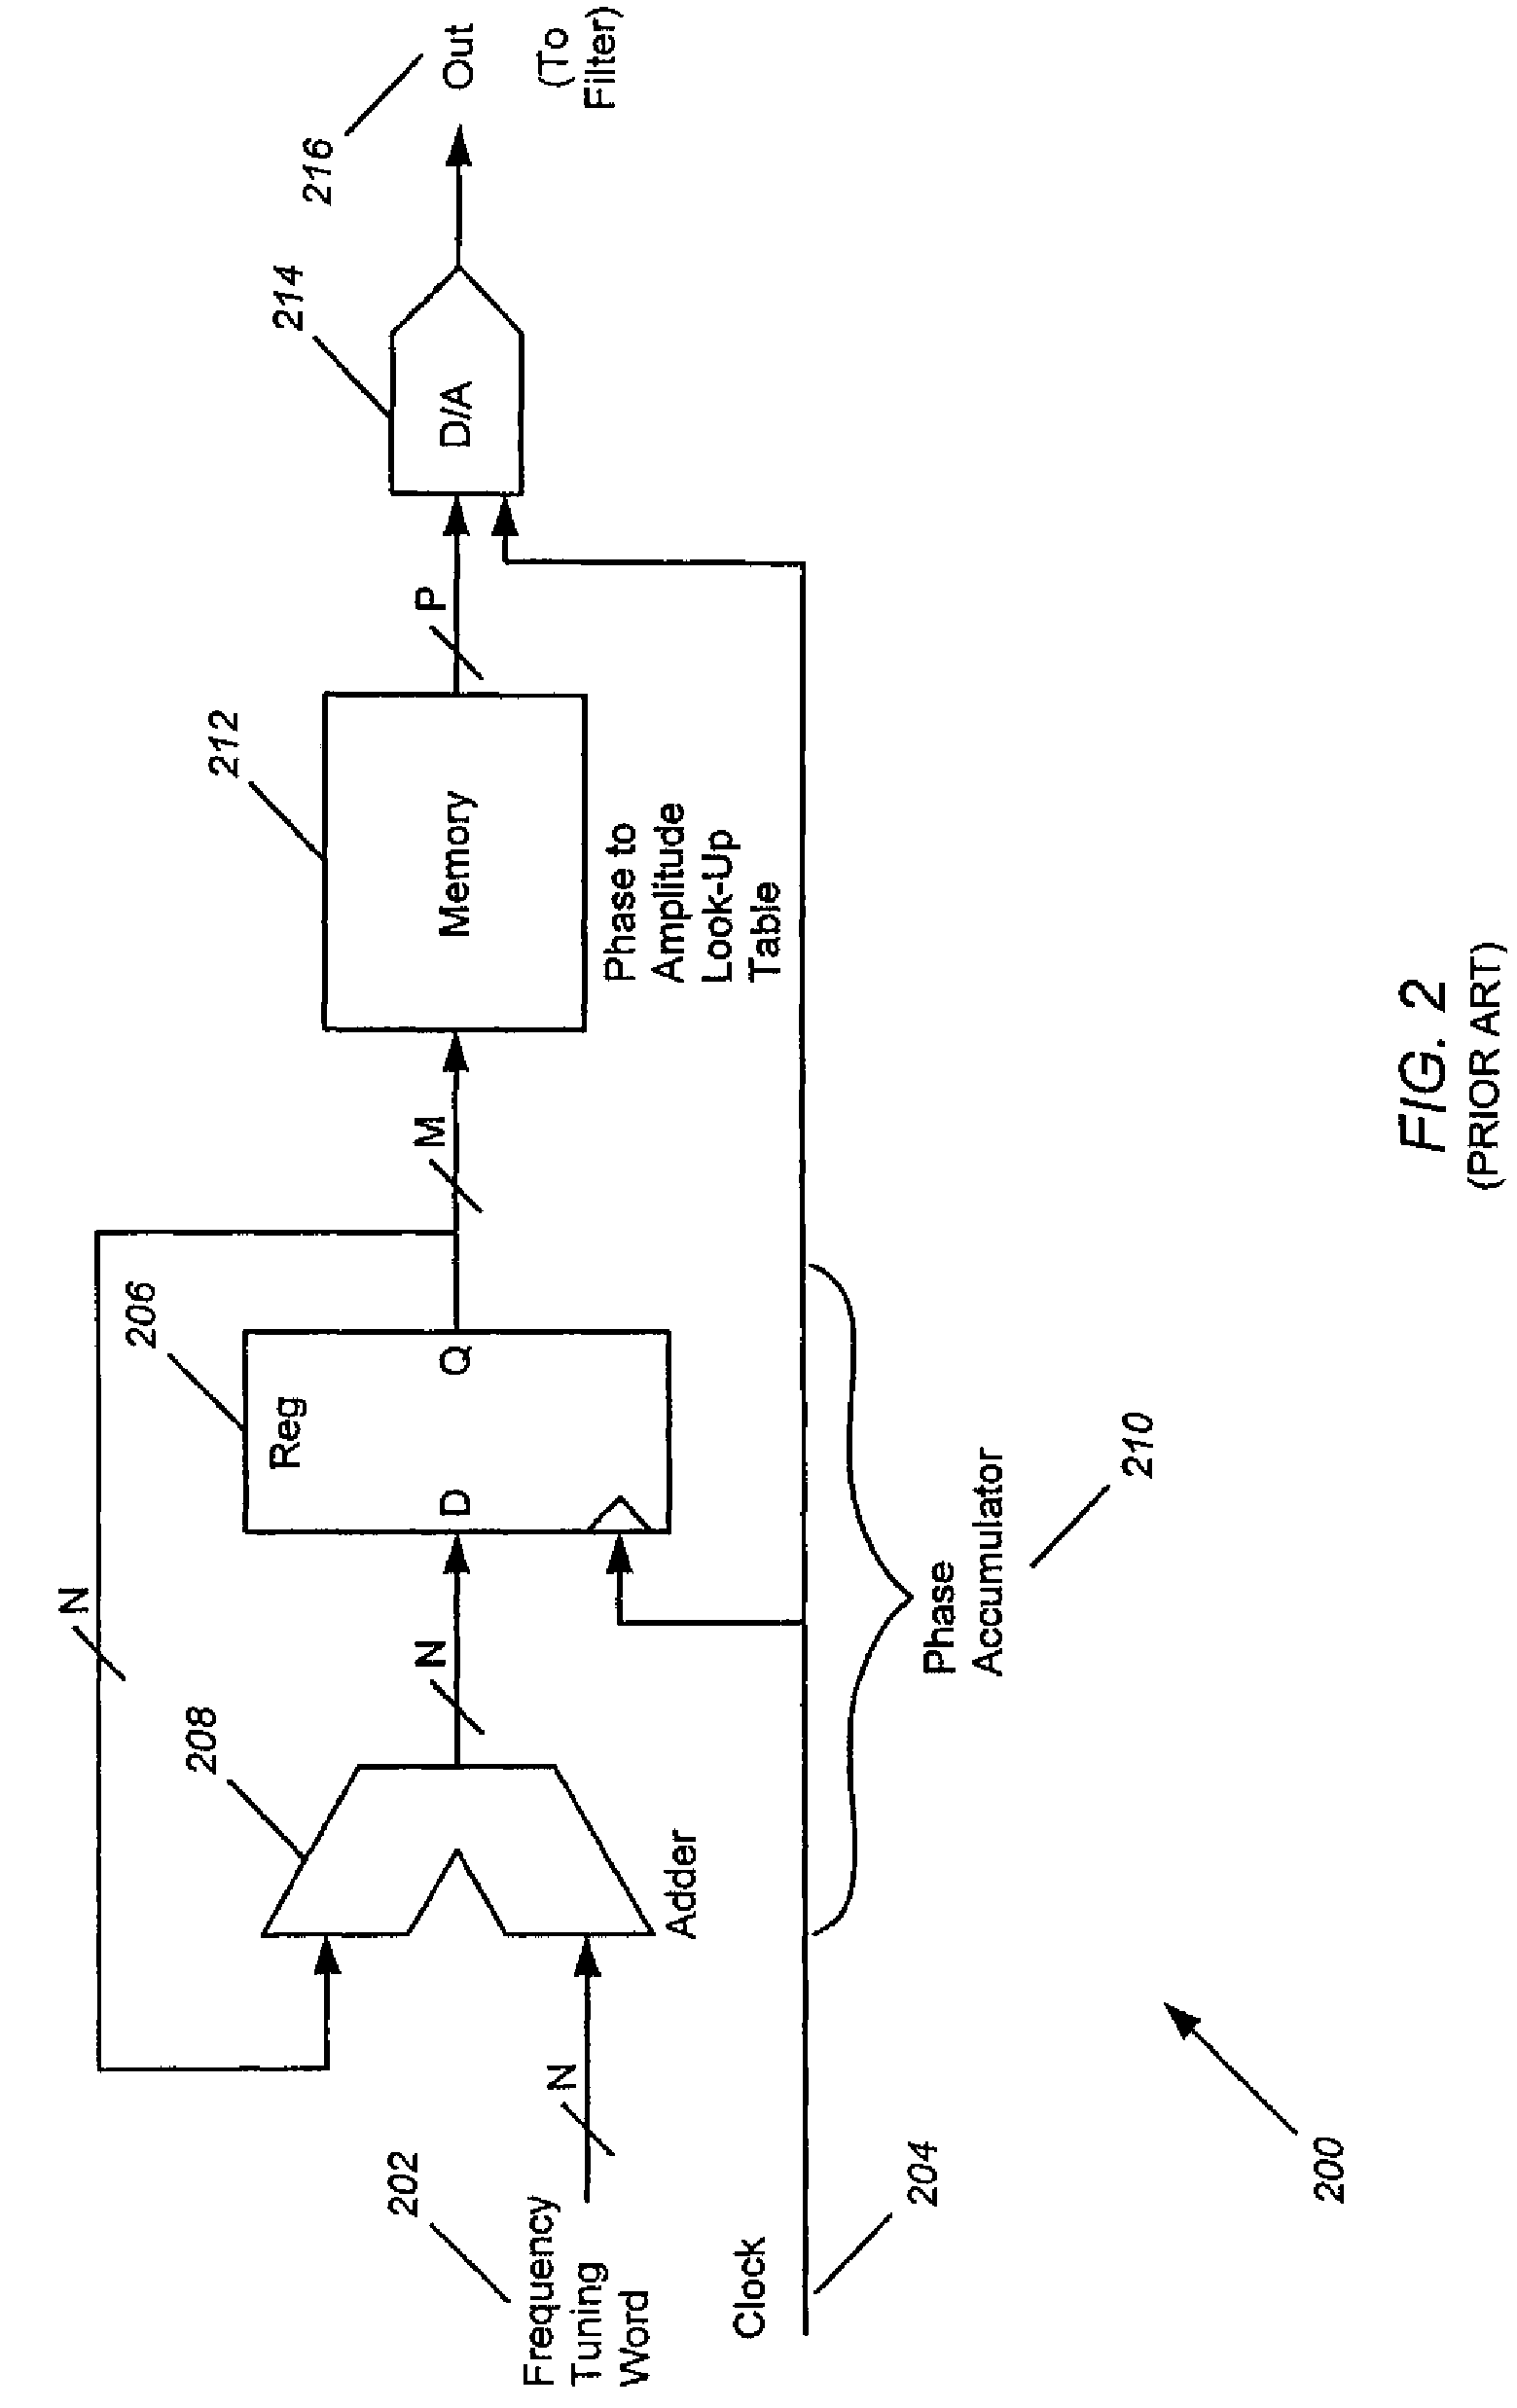 Method and apparatus for improving the frequency resolution of a direct digital synthesizer